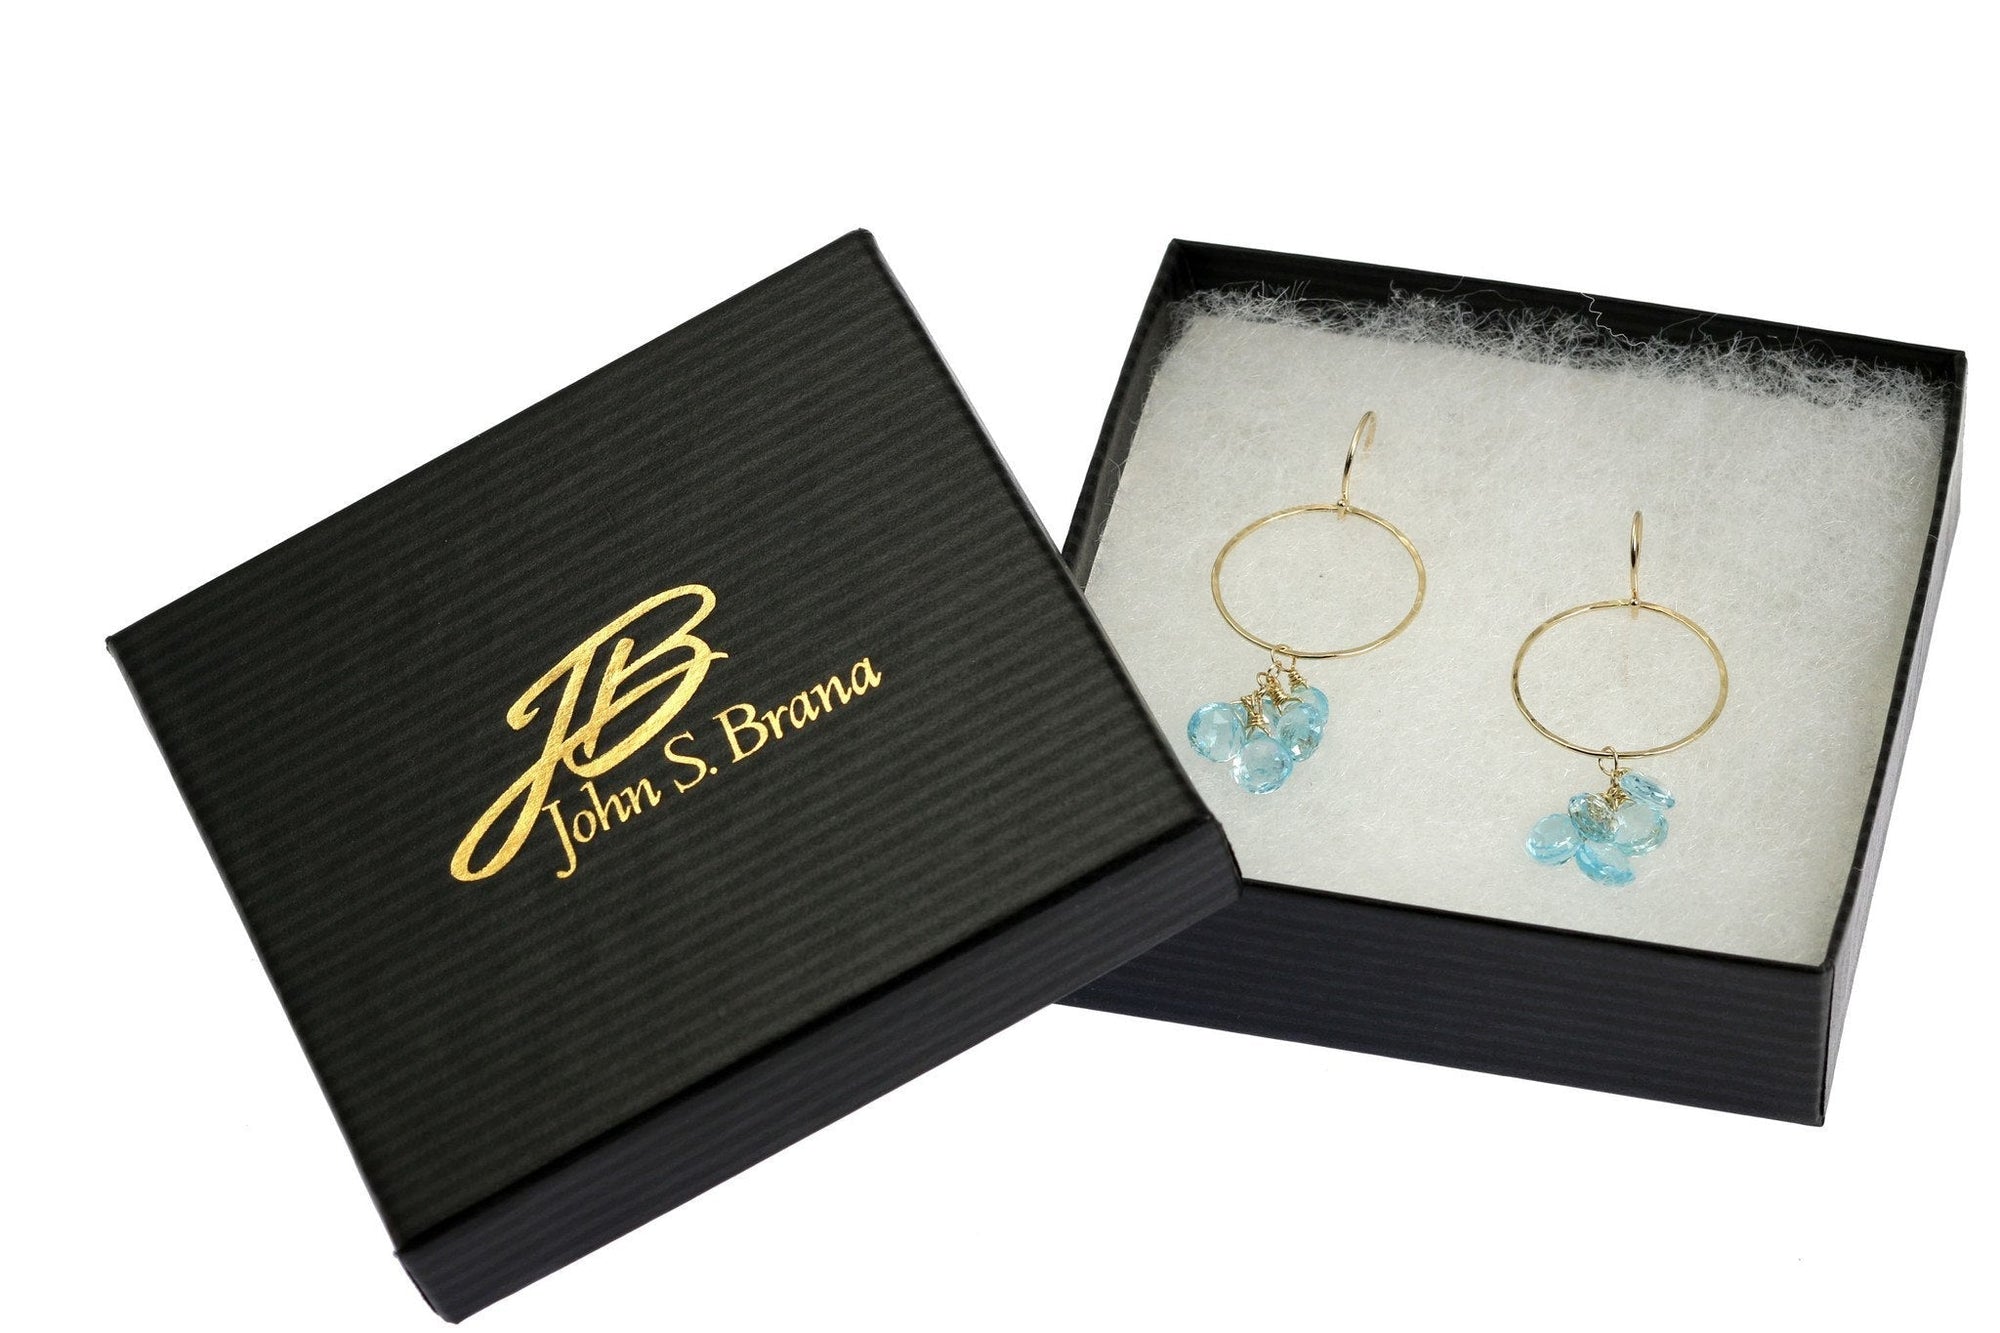 14K Hammered Gold Earrings With Blue Topaz in Black Gift Box